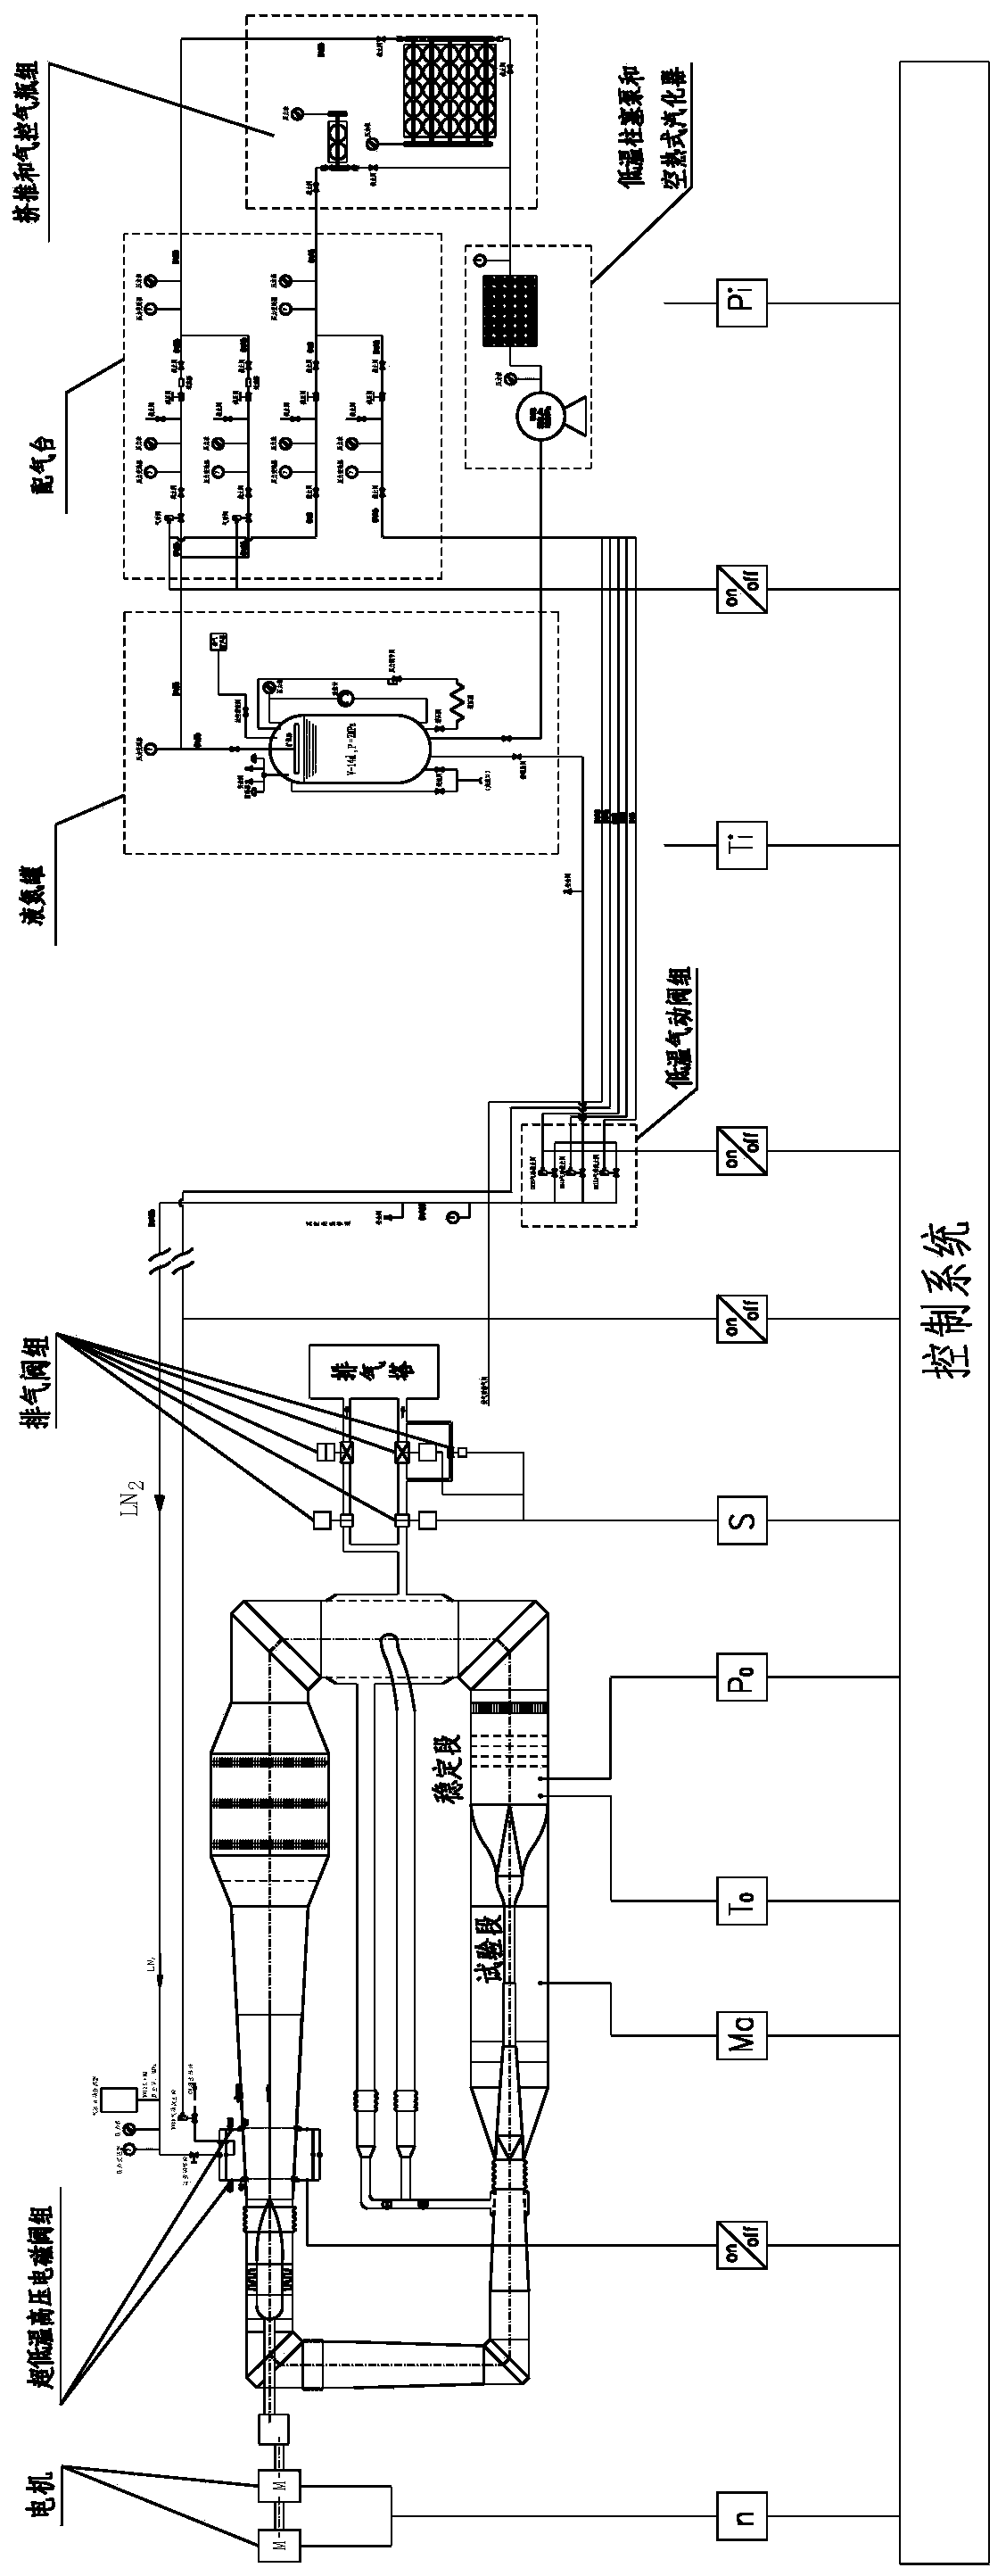 Running method of spraying liquid nitrogen cooling test in continuous transonic wind tunnel